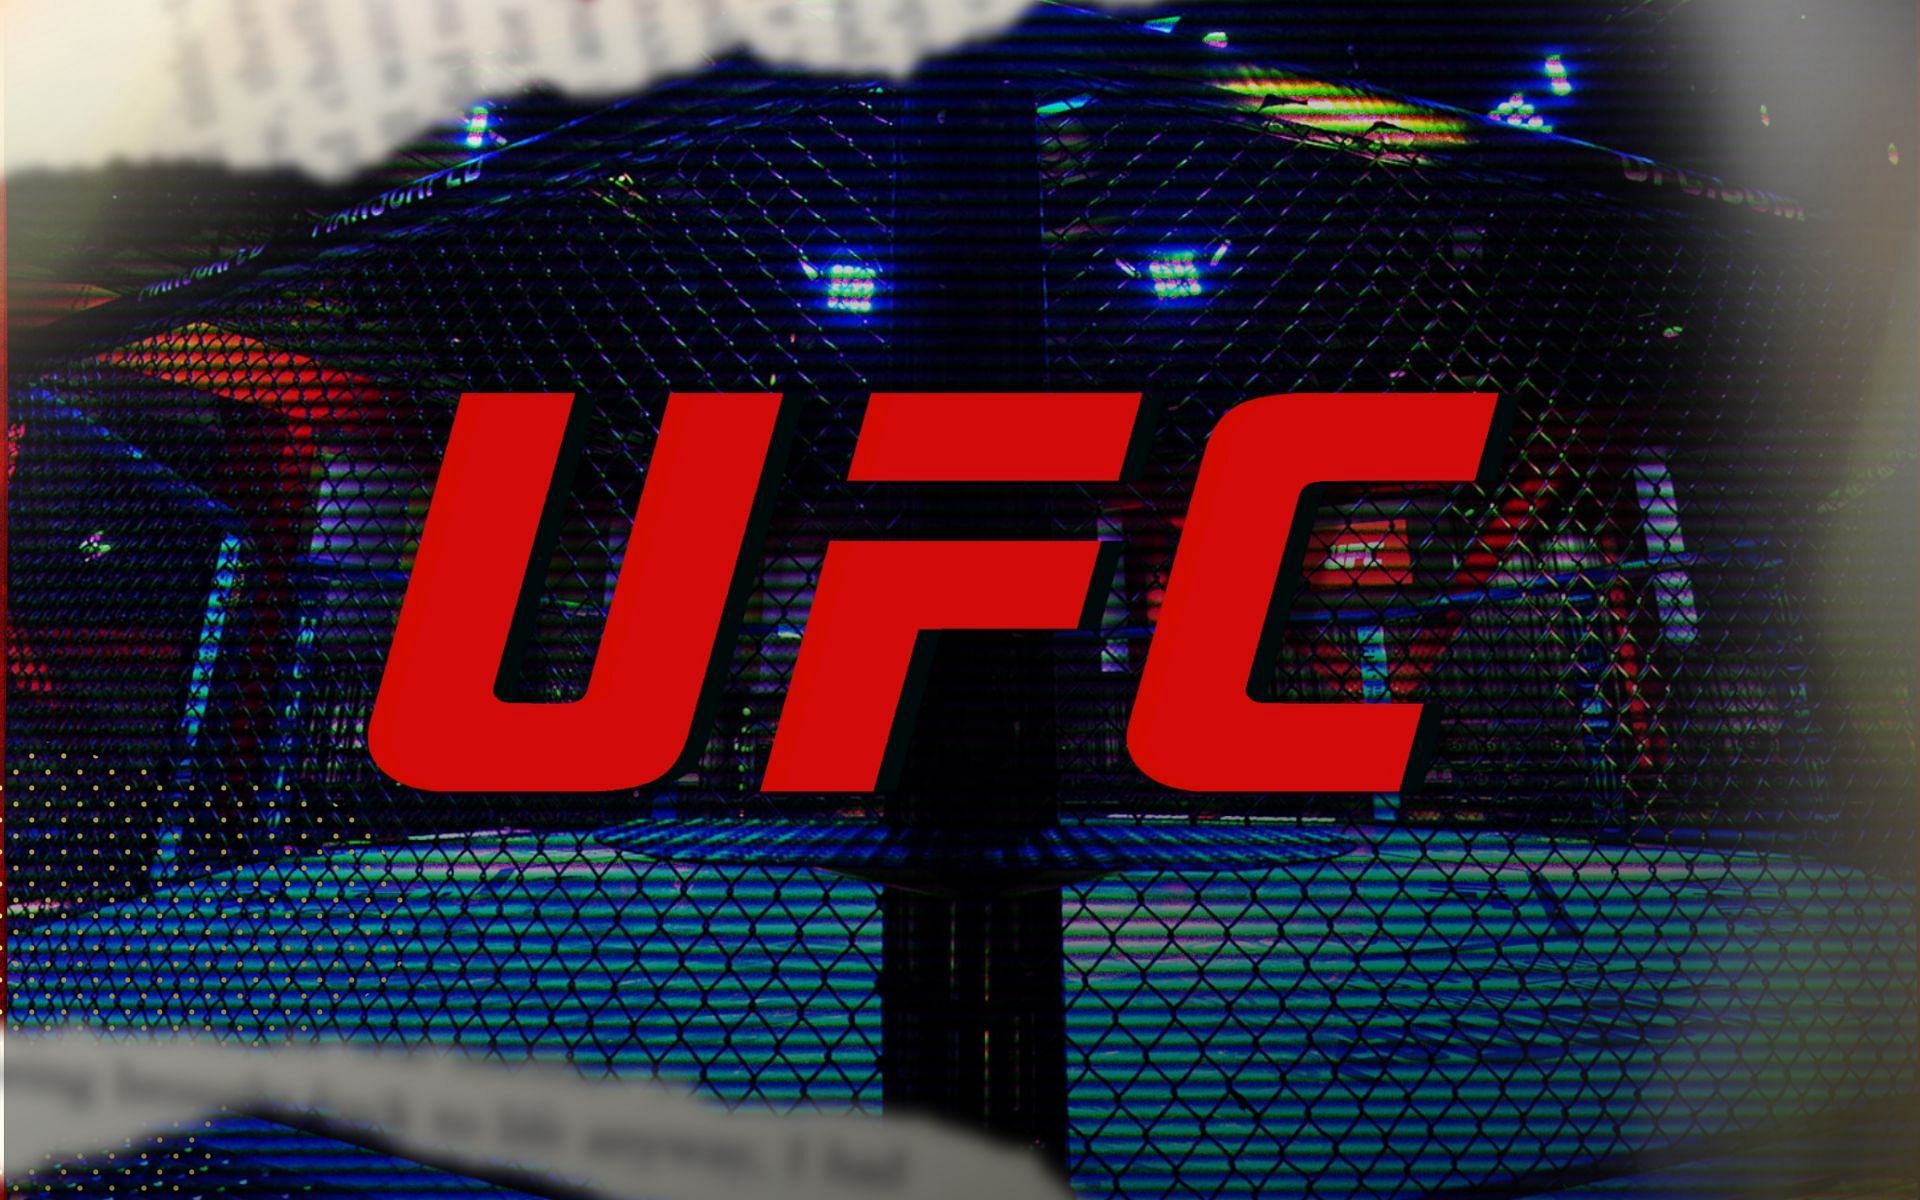 UFC fight event this weekend. [Image credits: ufc.com]